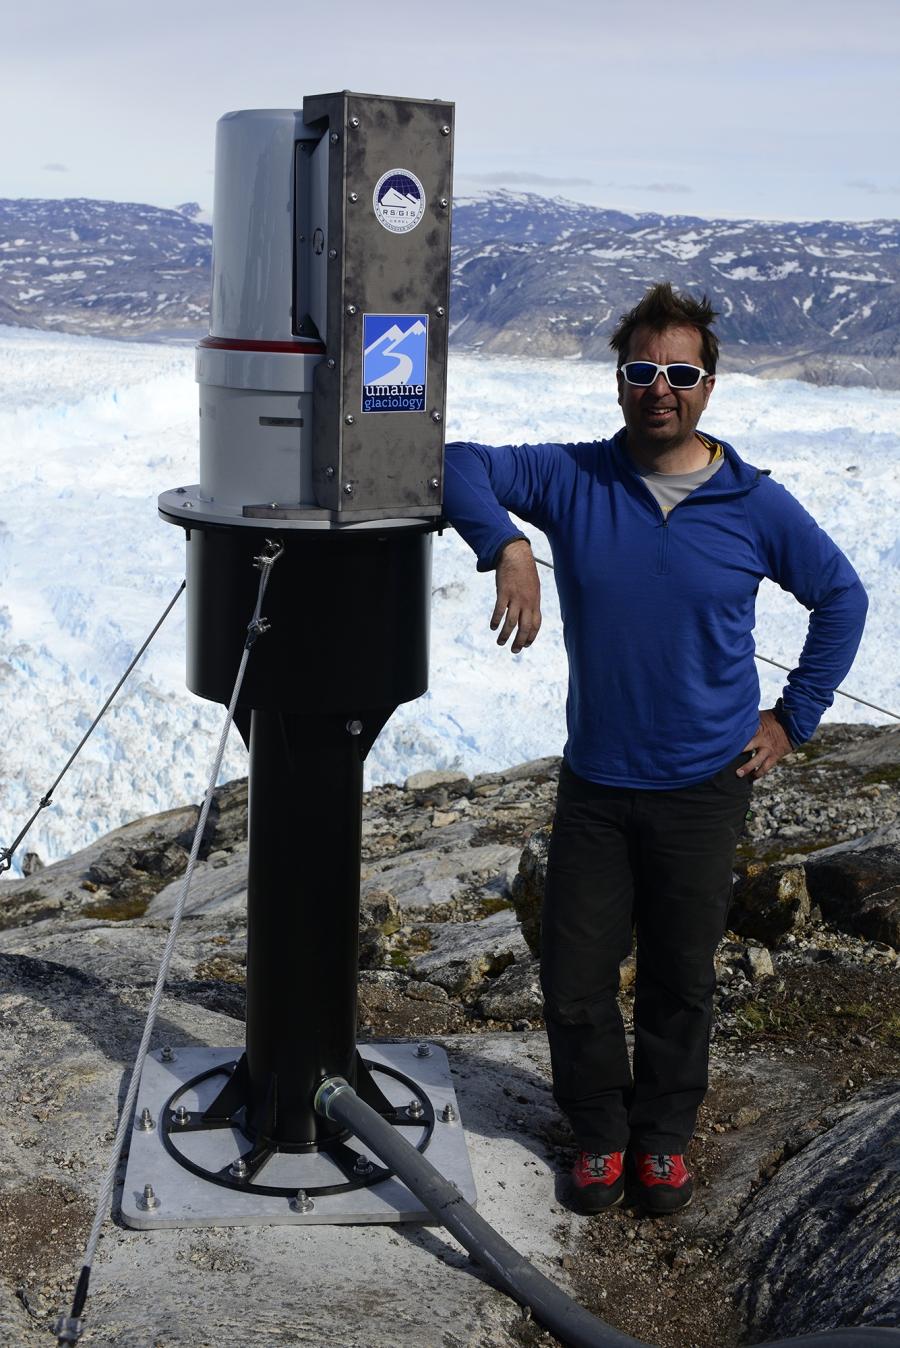 “We didn’t anticipate the changes that happened (in Greenland) in the last ten or 15 years,” says glaciologist Gordon Hamilton. “The ice sheet has waxed and waned with time for sure, but I don’t think it’s been through such a large set of changes in such 